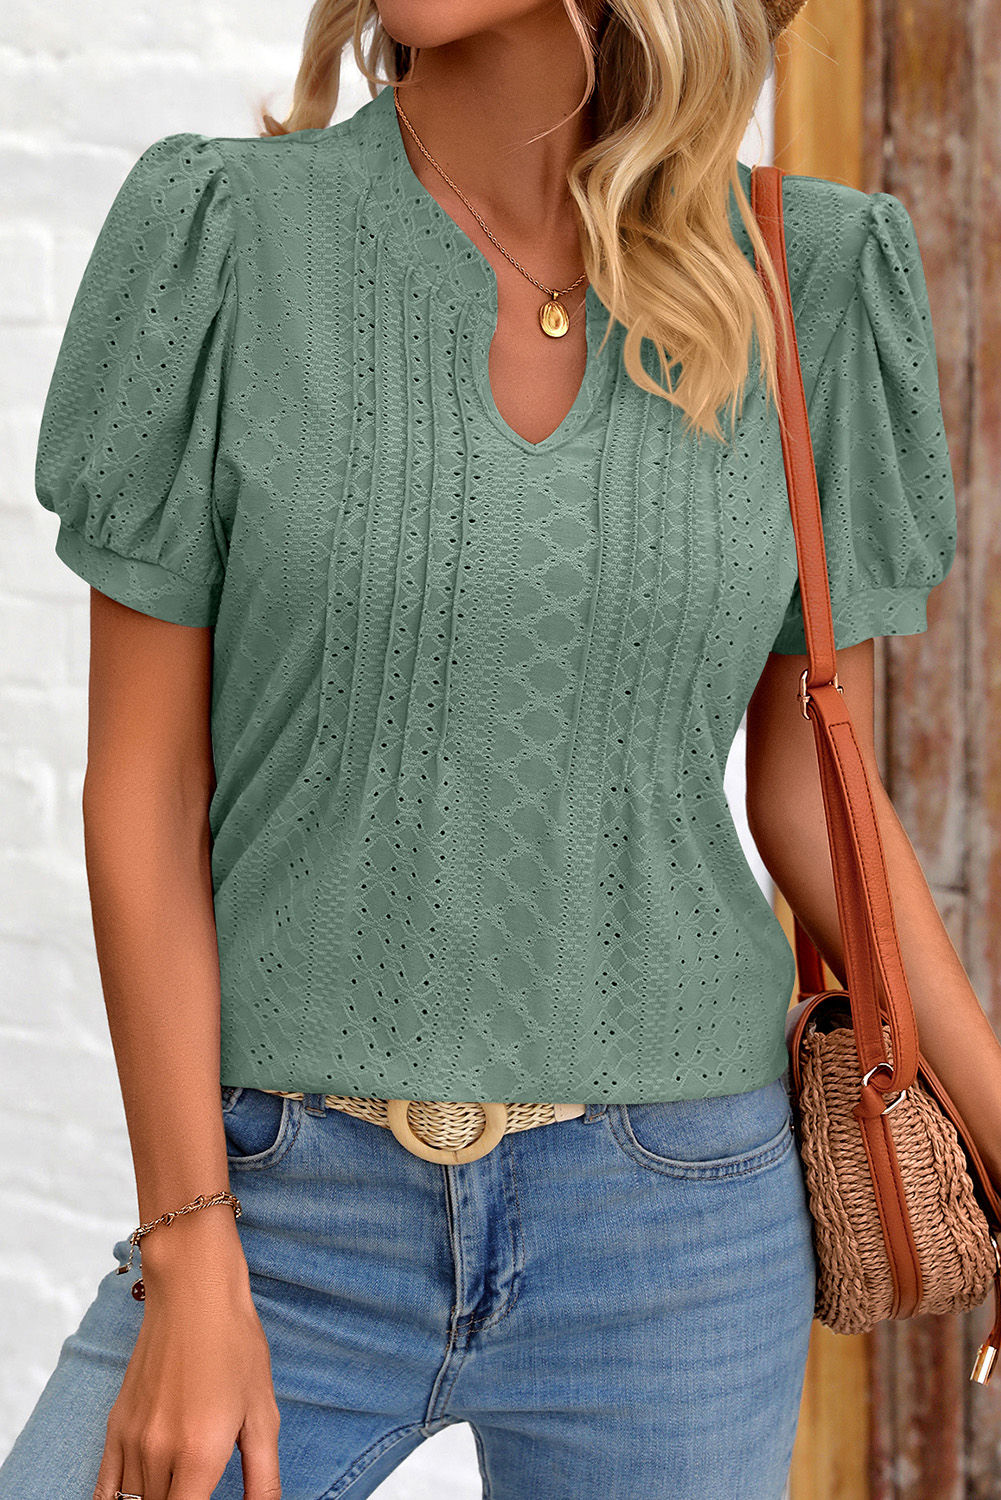 Shewin Wholesale LADY Mist Green V Neck Textured Short Puff Sleeve Blouse